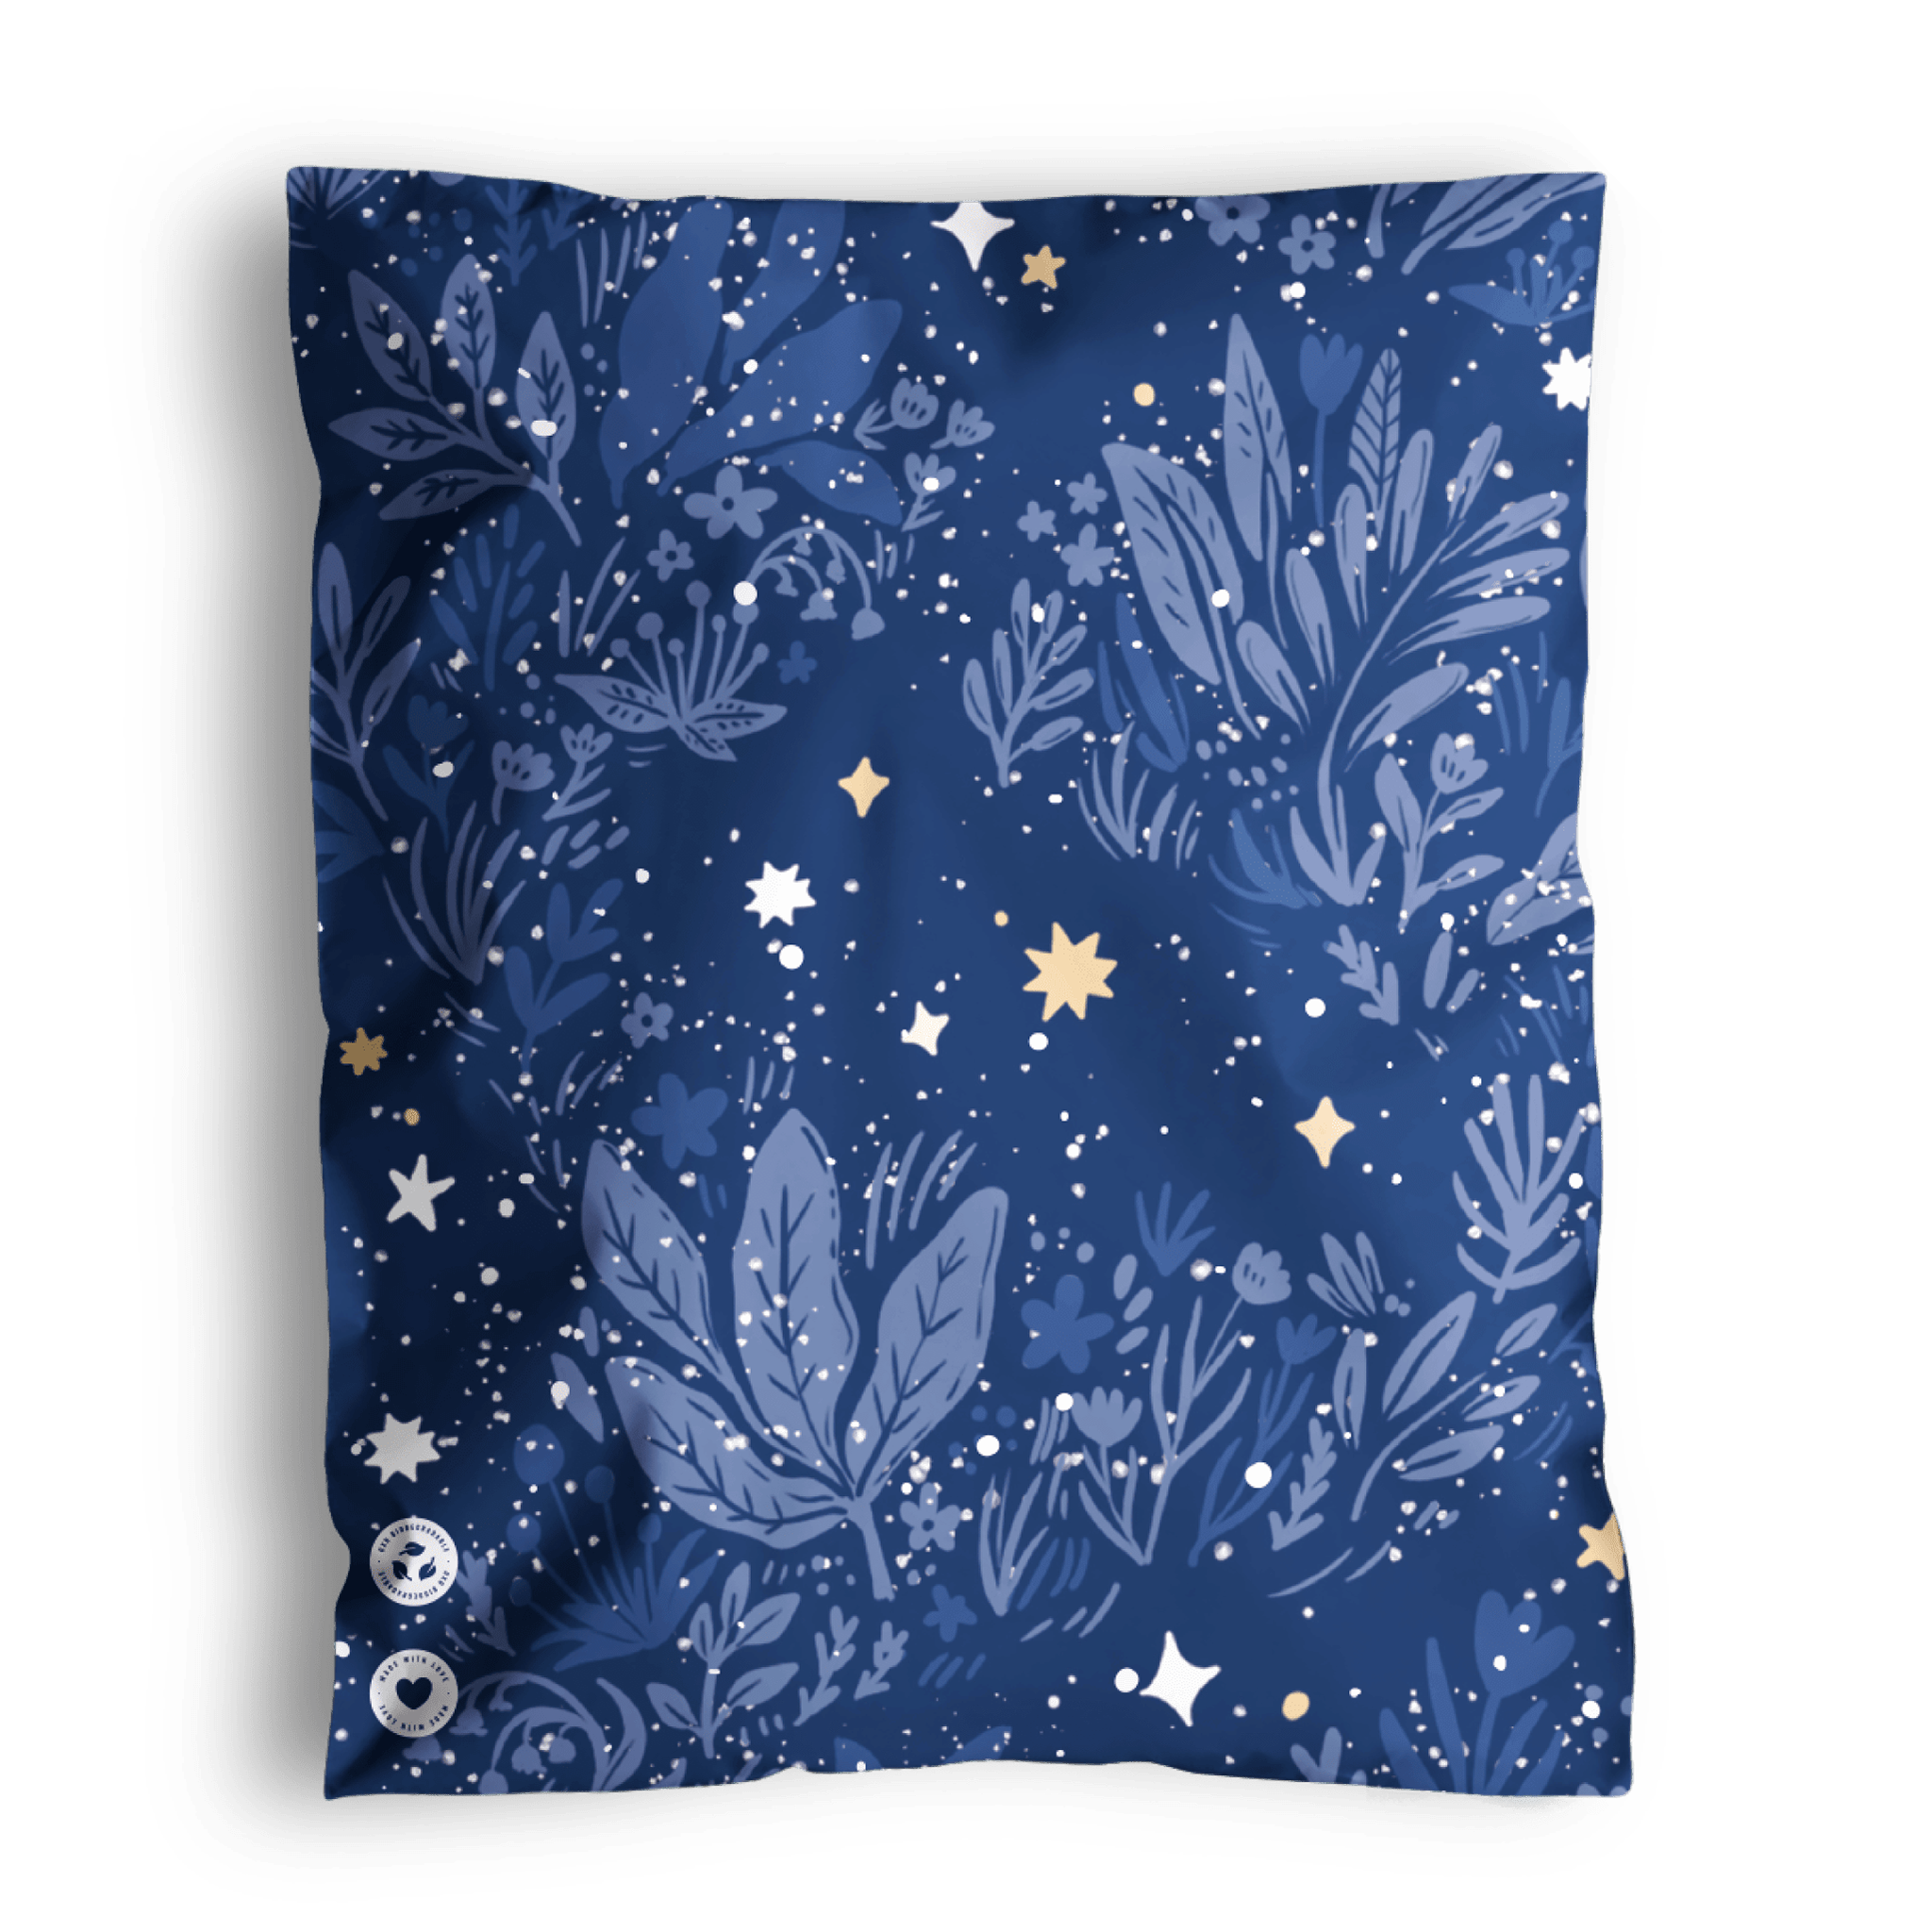 A patterned blue Midnight Indigo Mailers 10" x 13" scarf with botanical and starry motifs, displayed on a dark background, now comes in recyclable packaging by impack.co.